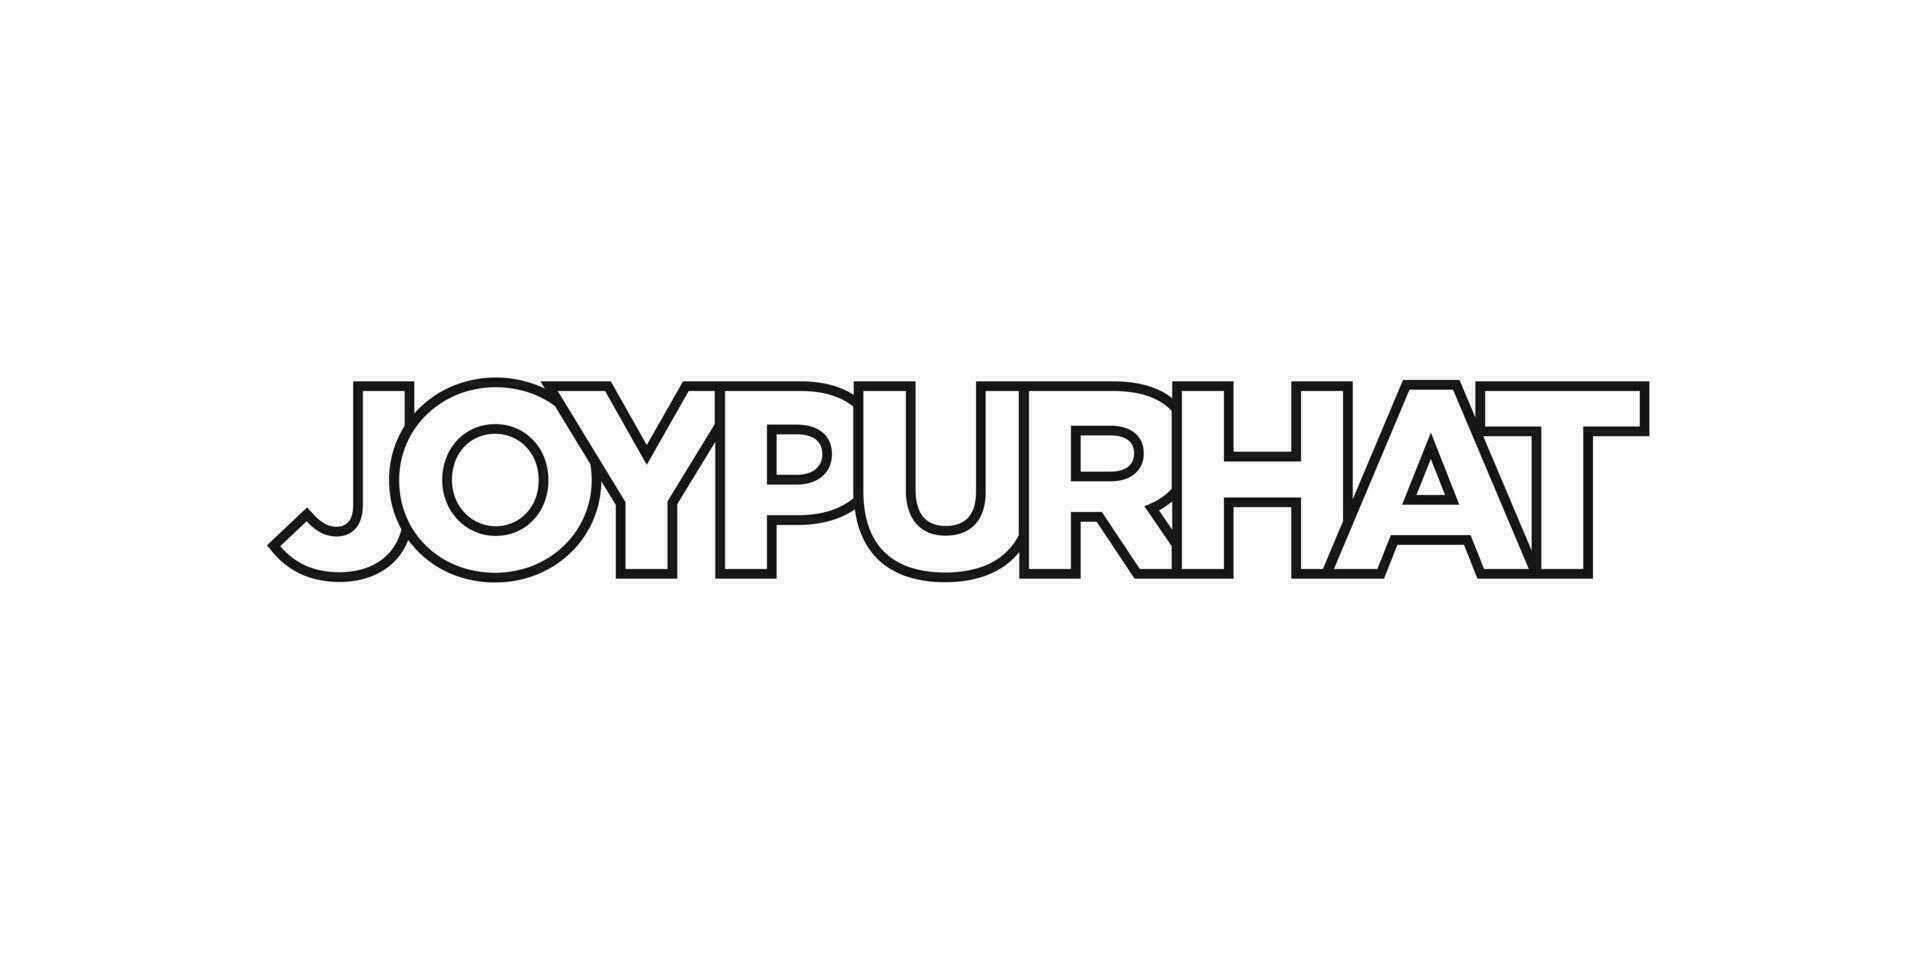 Joypurhat in the Bangladesh emblem. The design features a geometric style, vector illustration with bold typography in a modern font. The graphic slogan lettering.